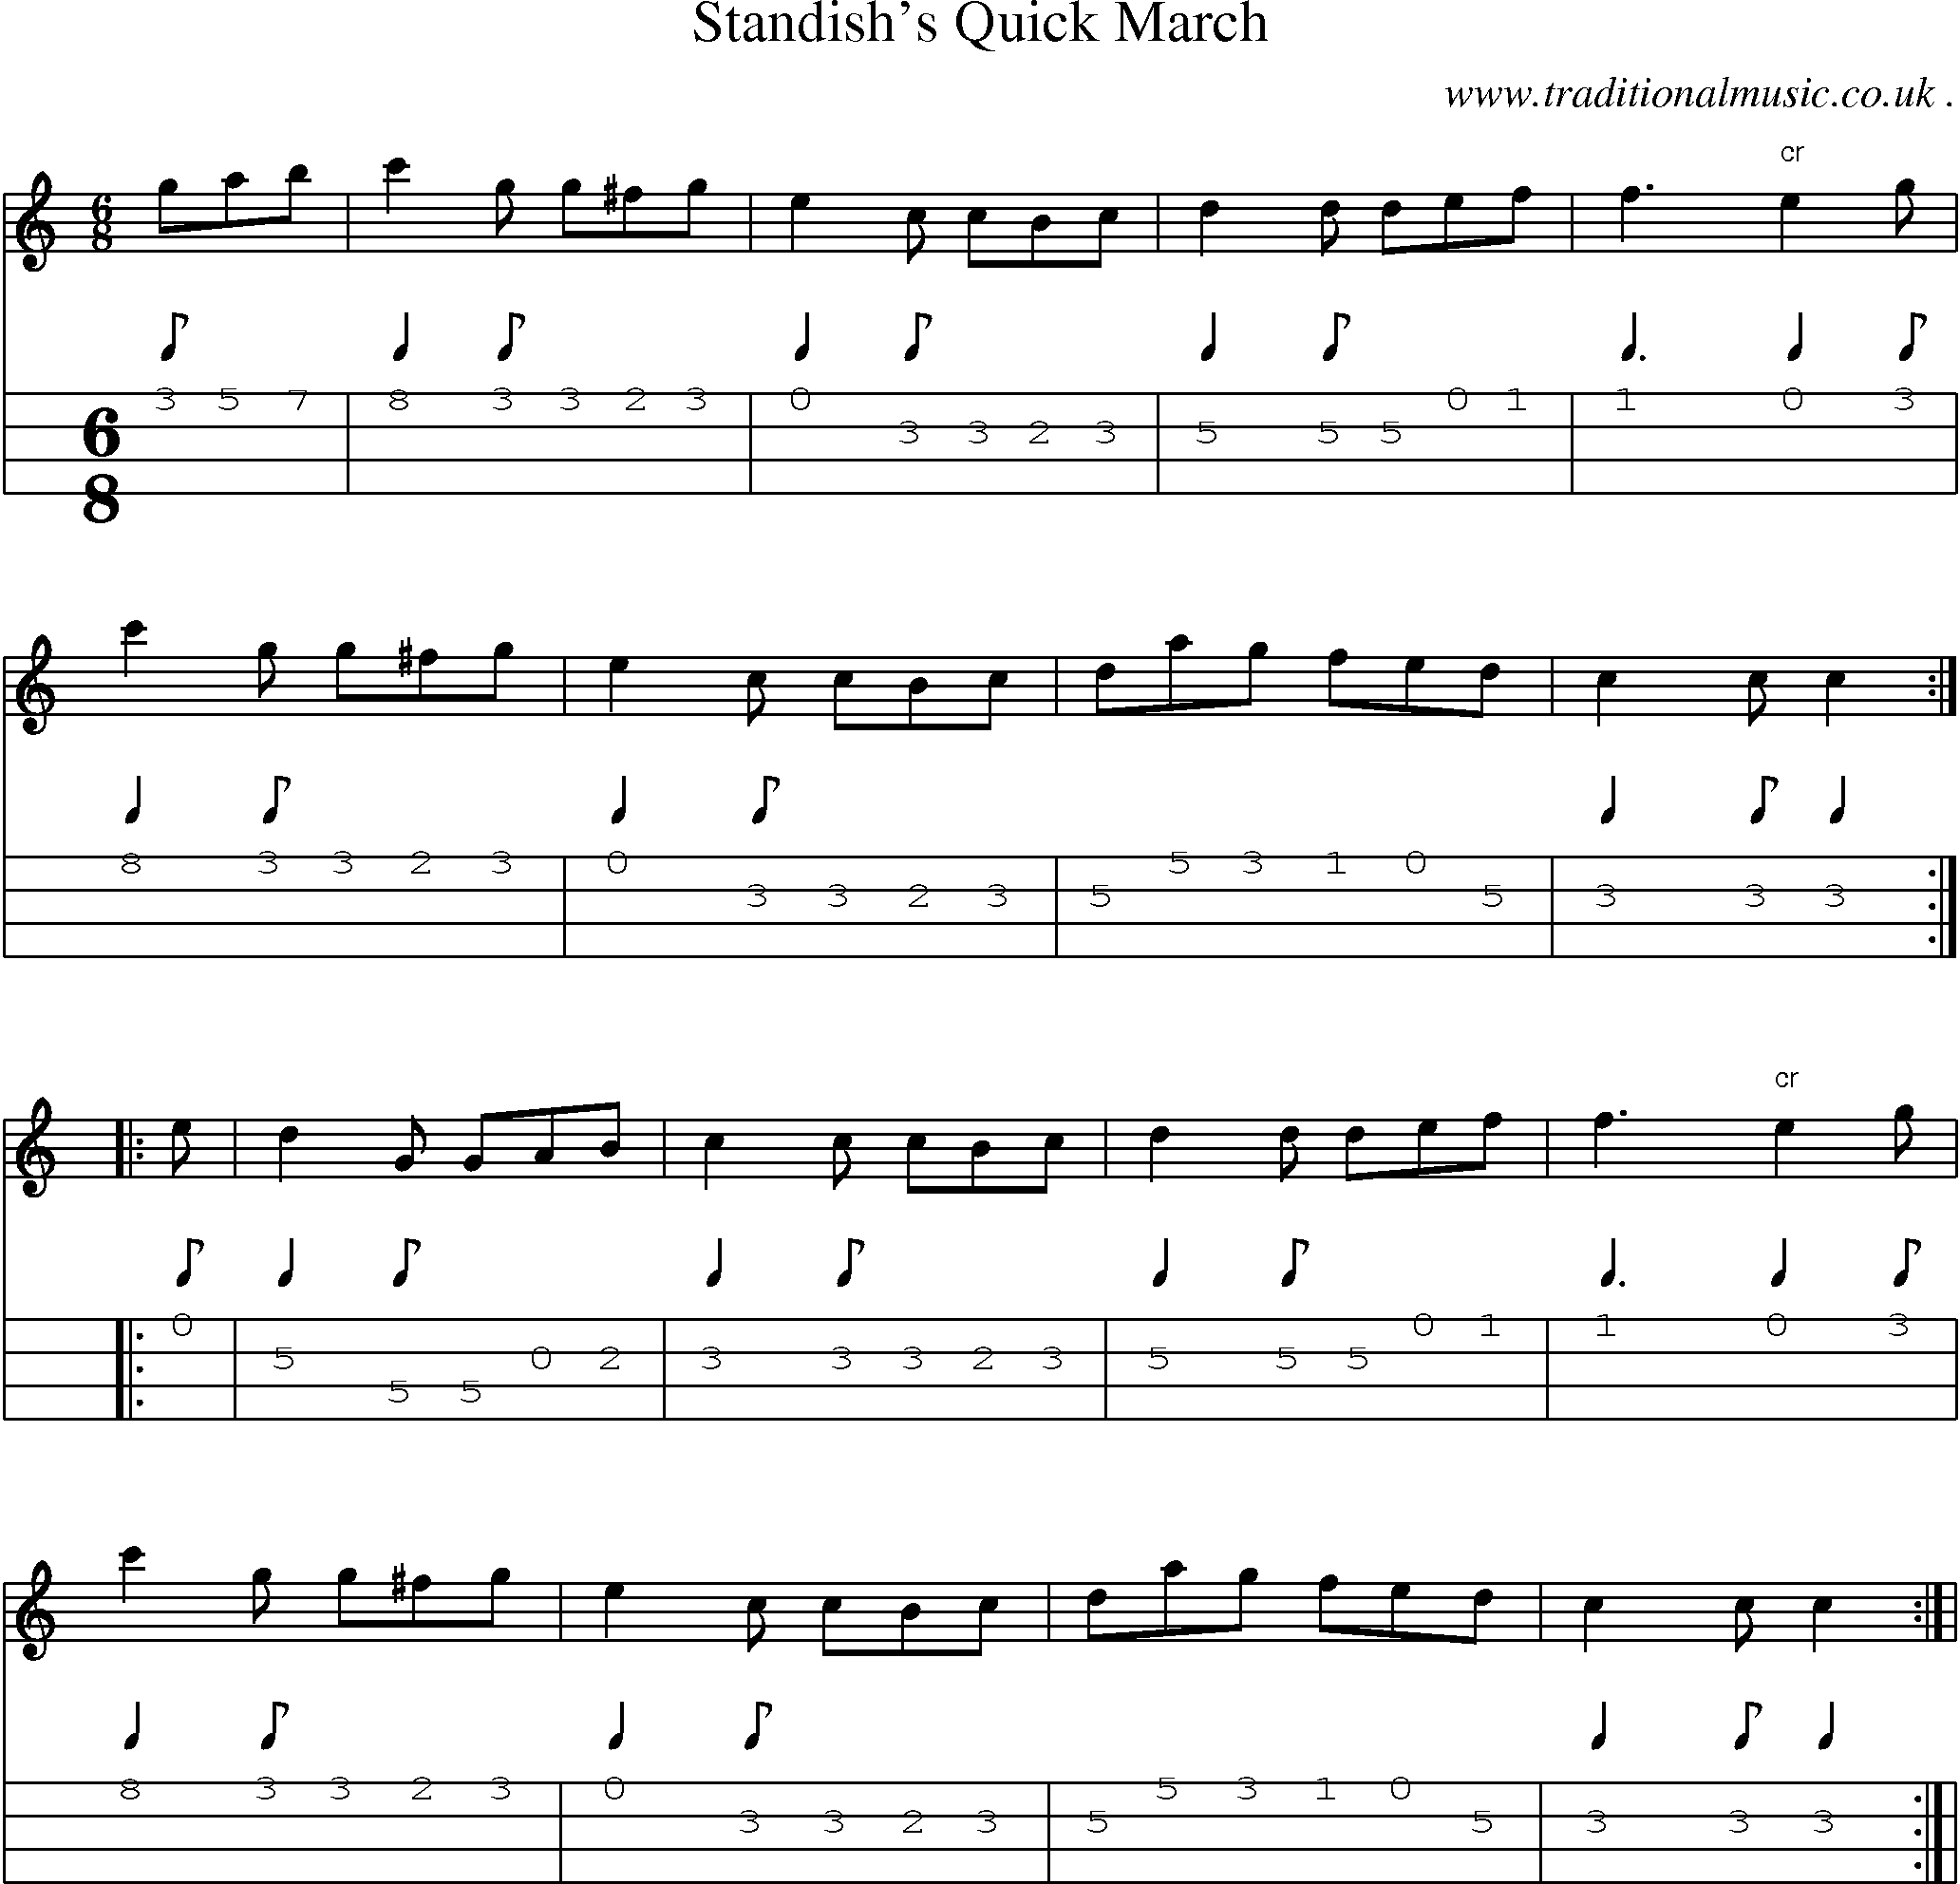 Sheet-Music and Mandolin Tabs for Standishs Quick March